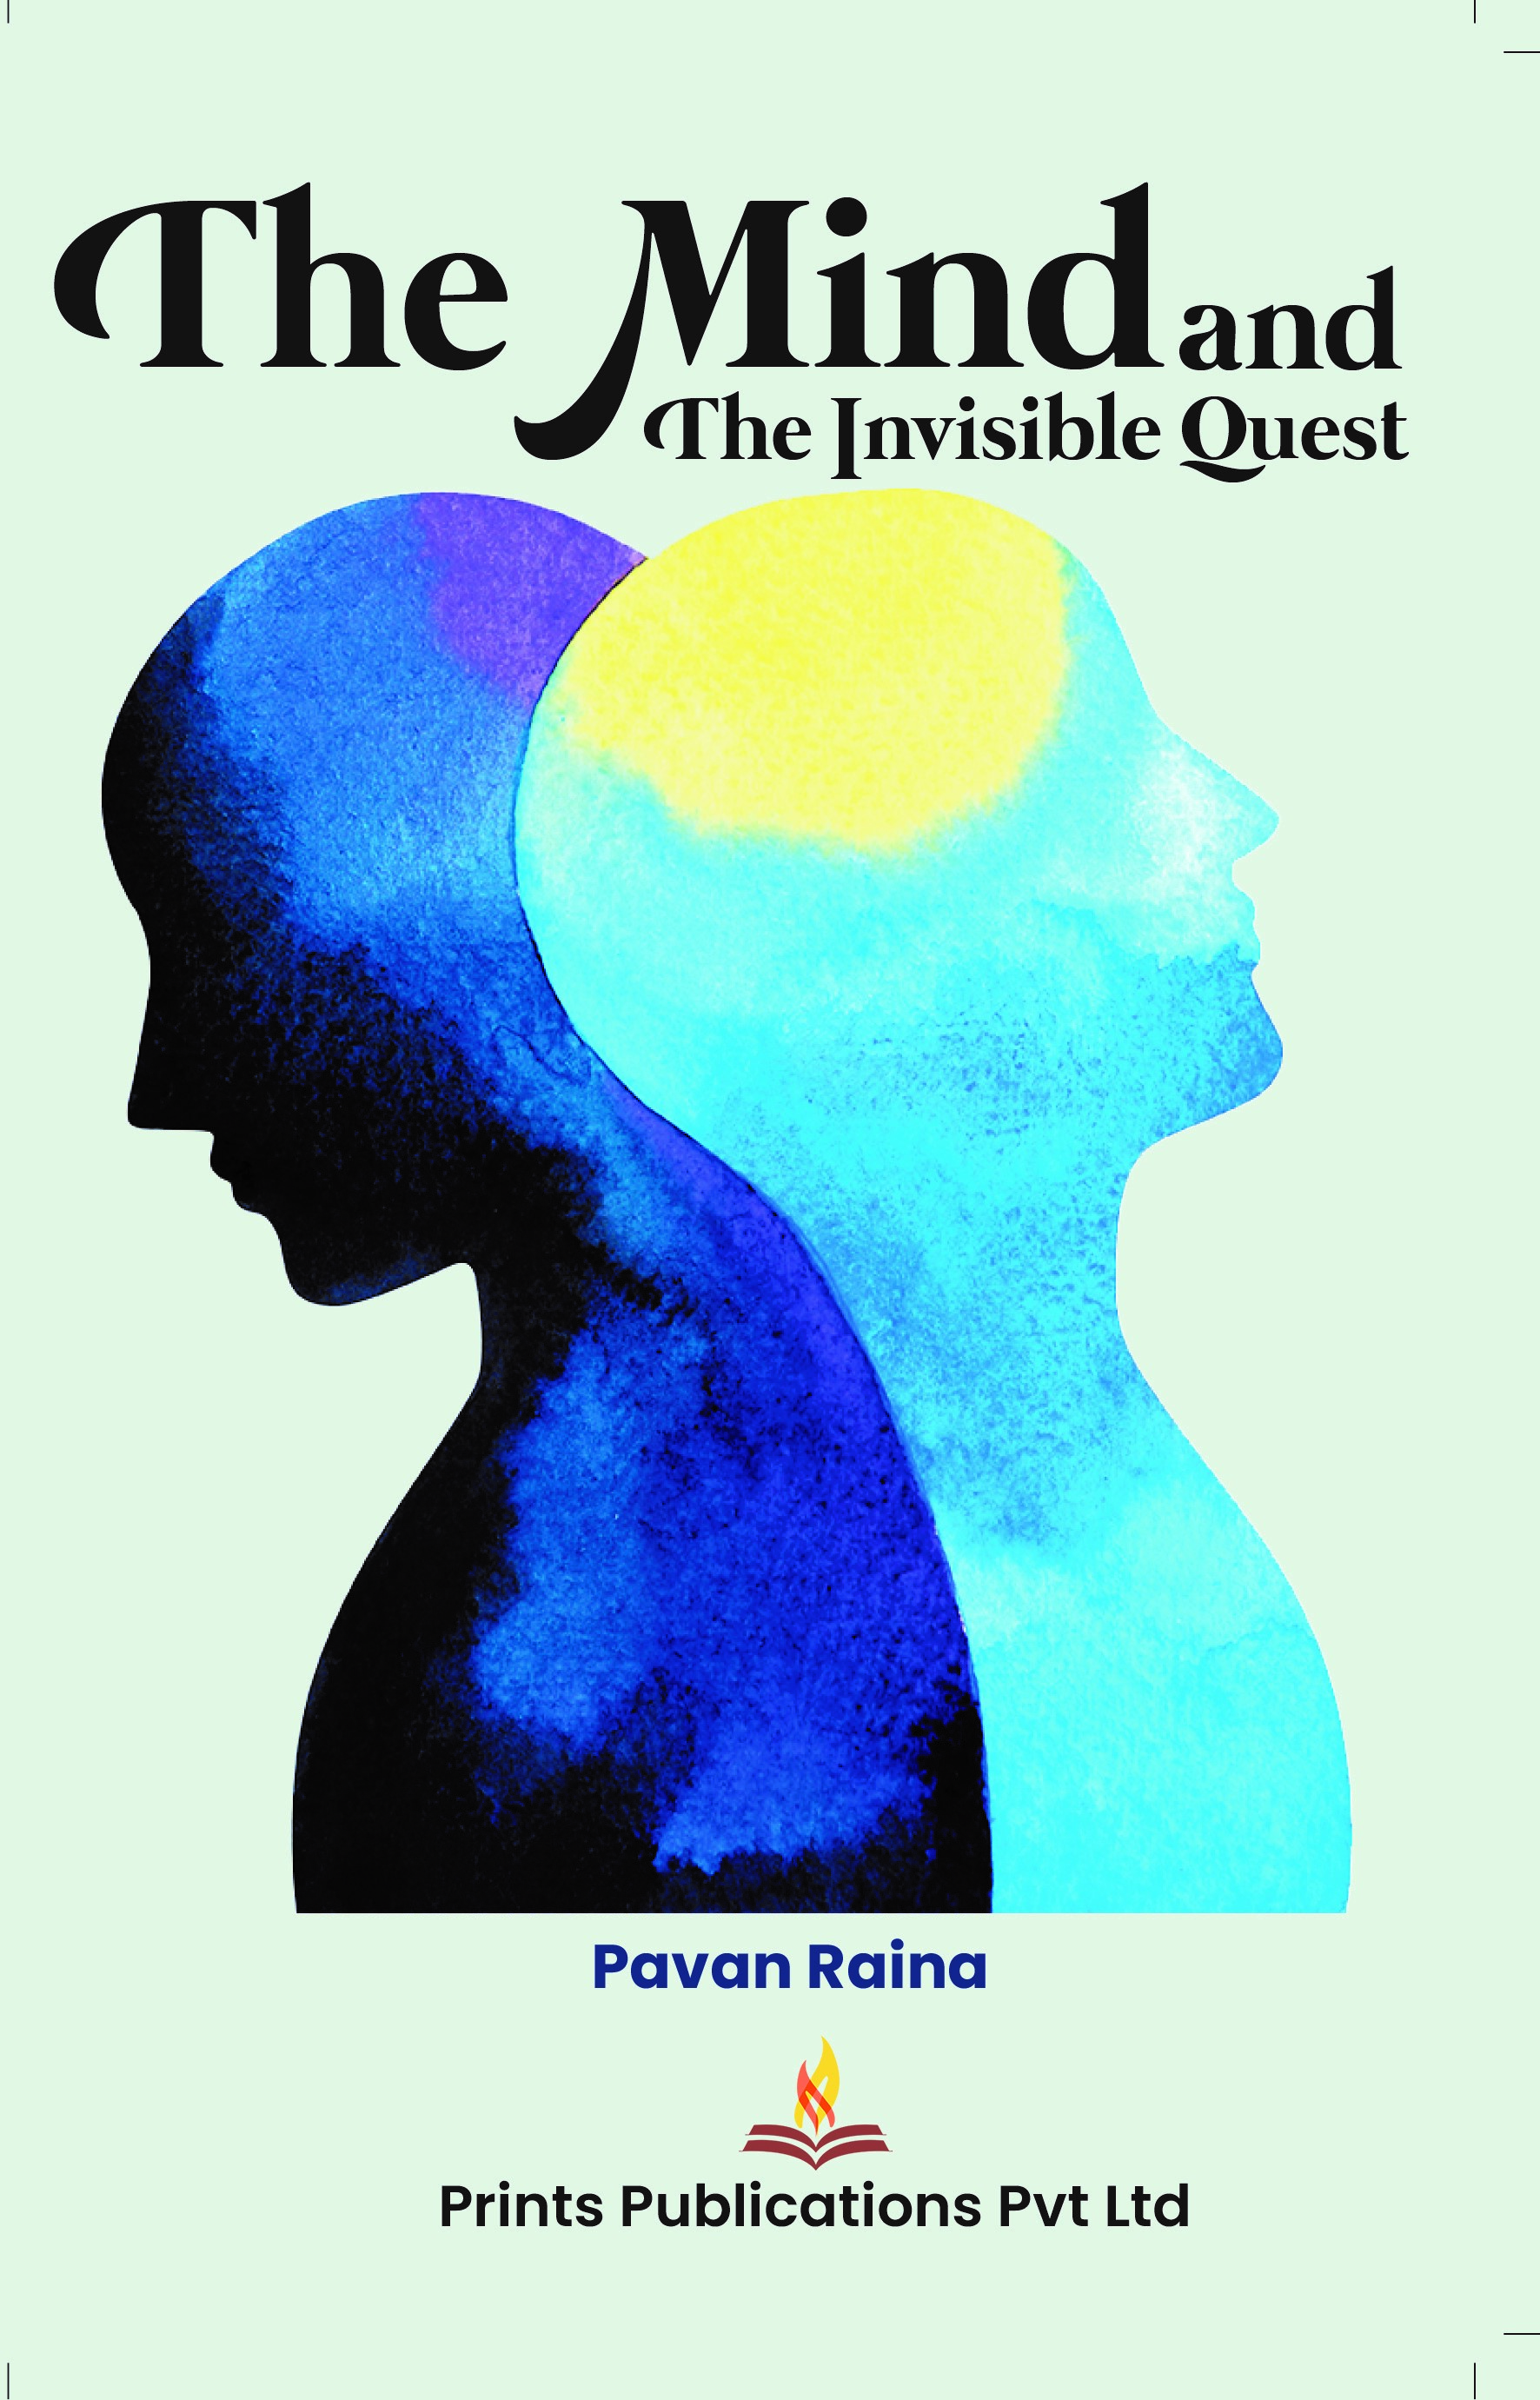 THE MIND AND THE INVISIBLE QUEST